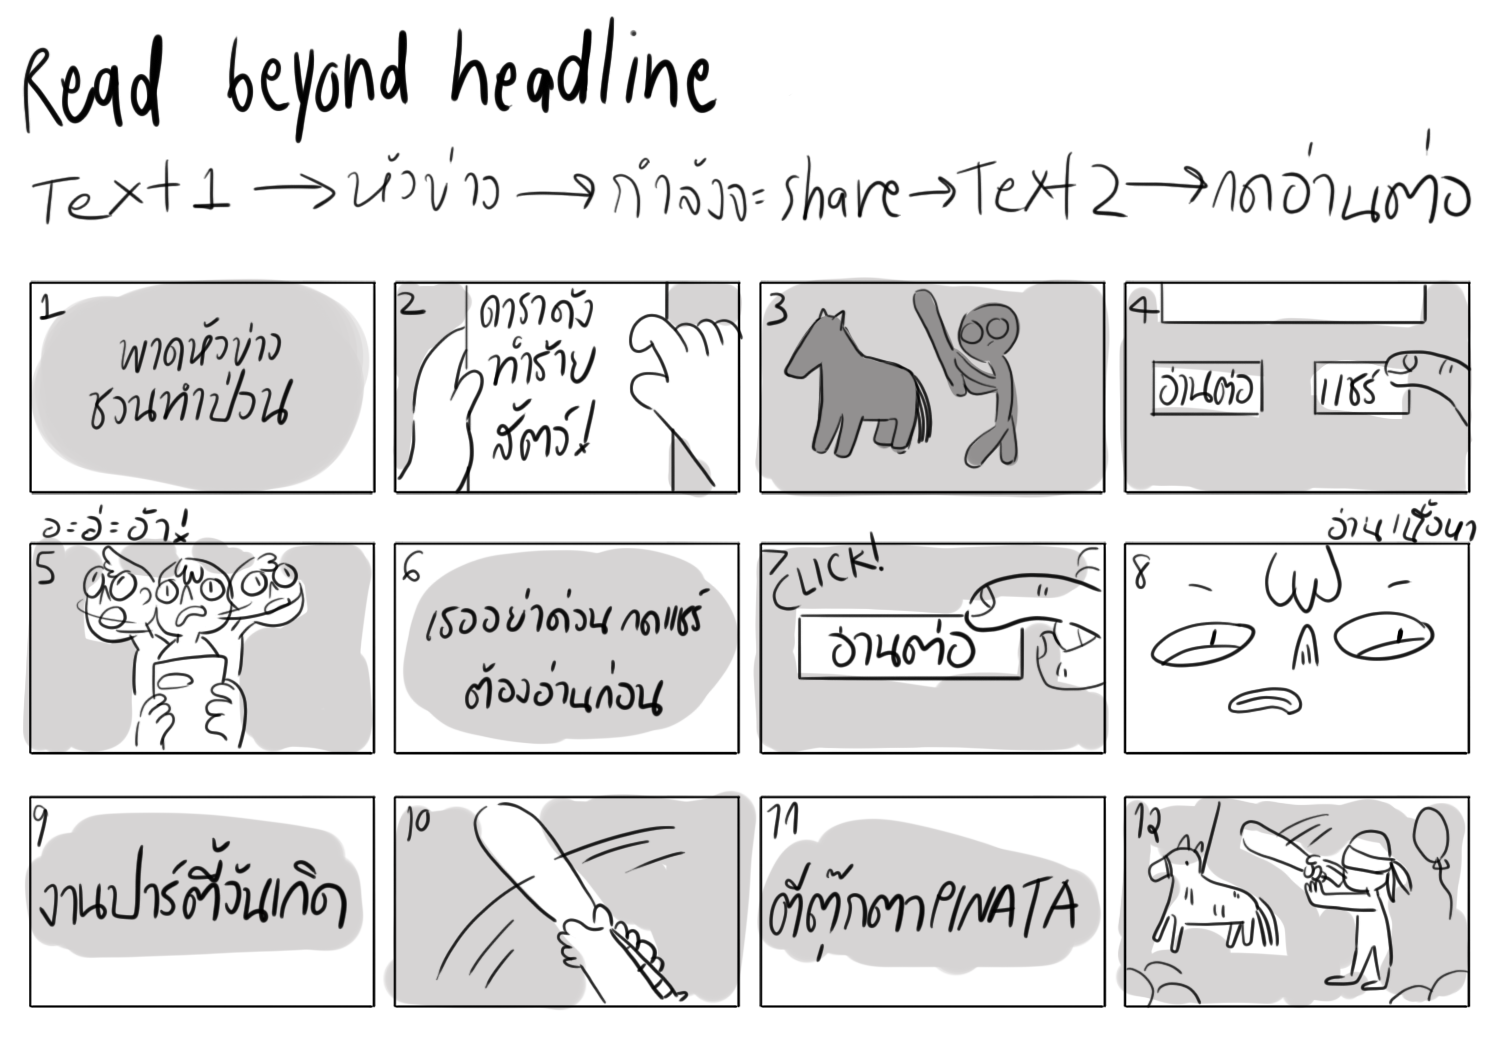 Storyboard for Read beyond the Headline